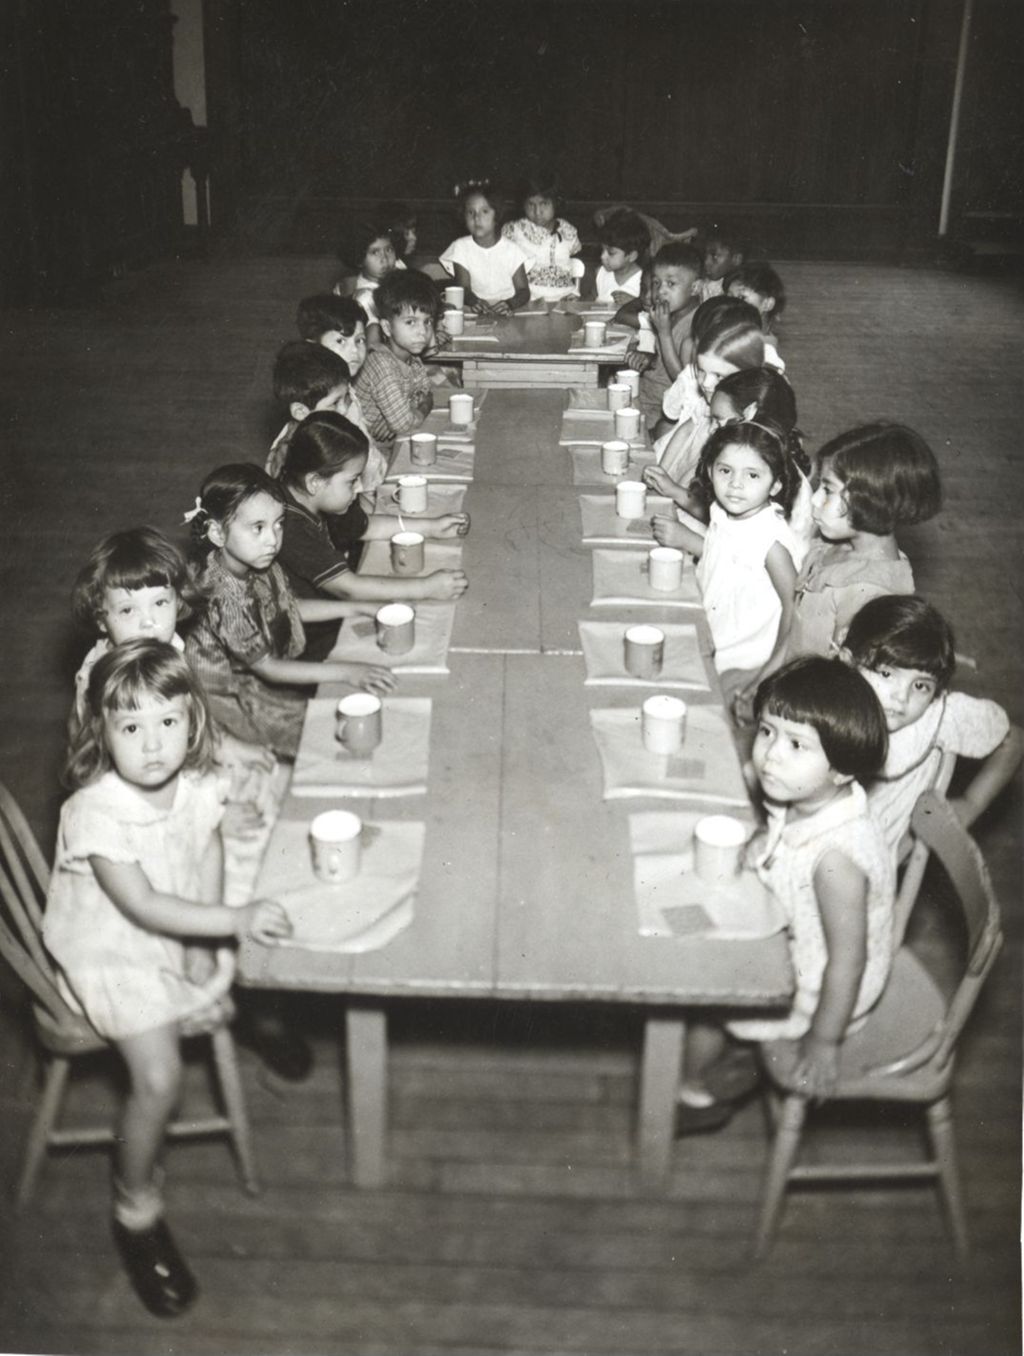 Children seated at table waiting for a meal